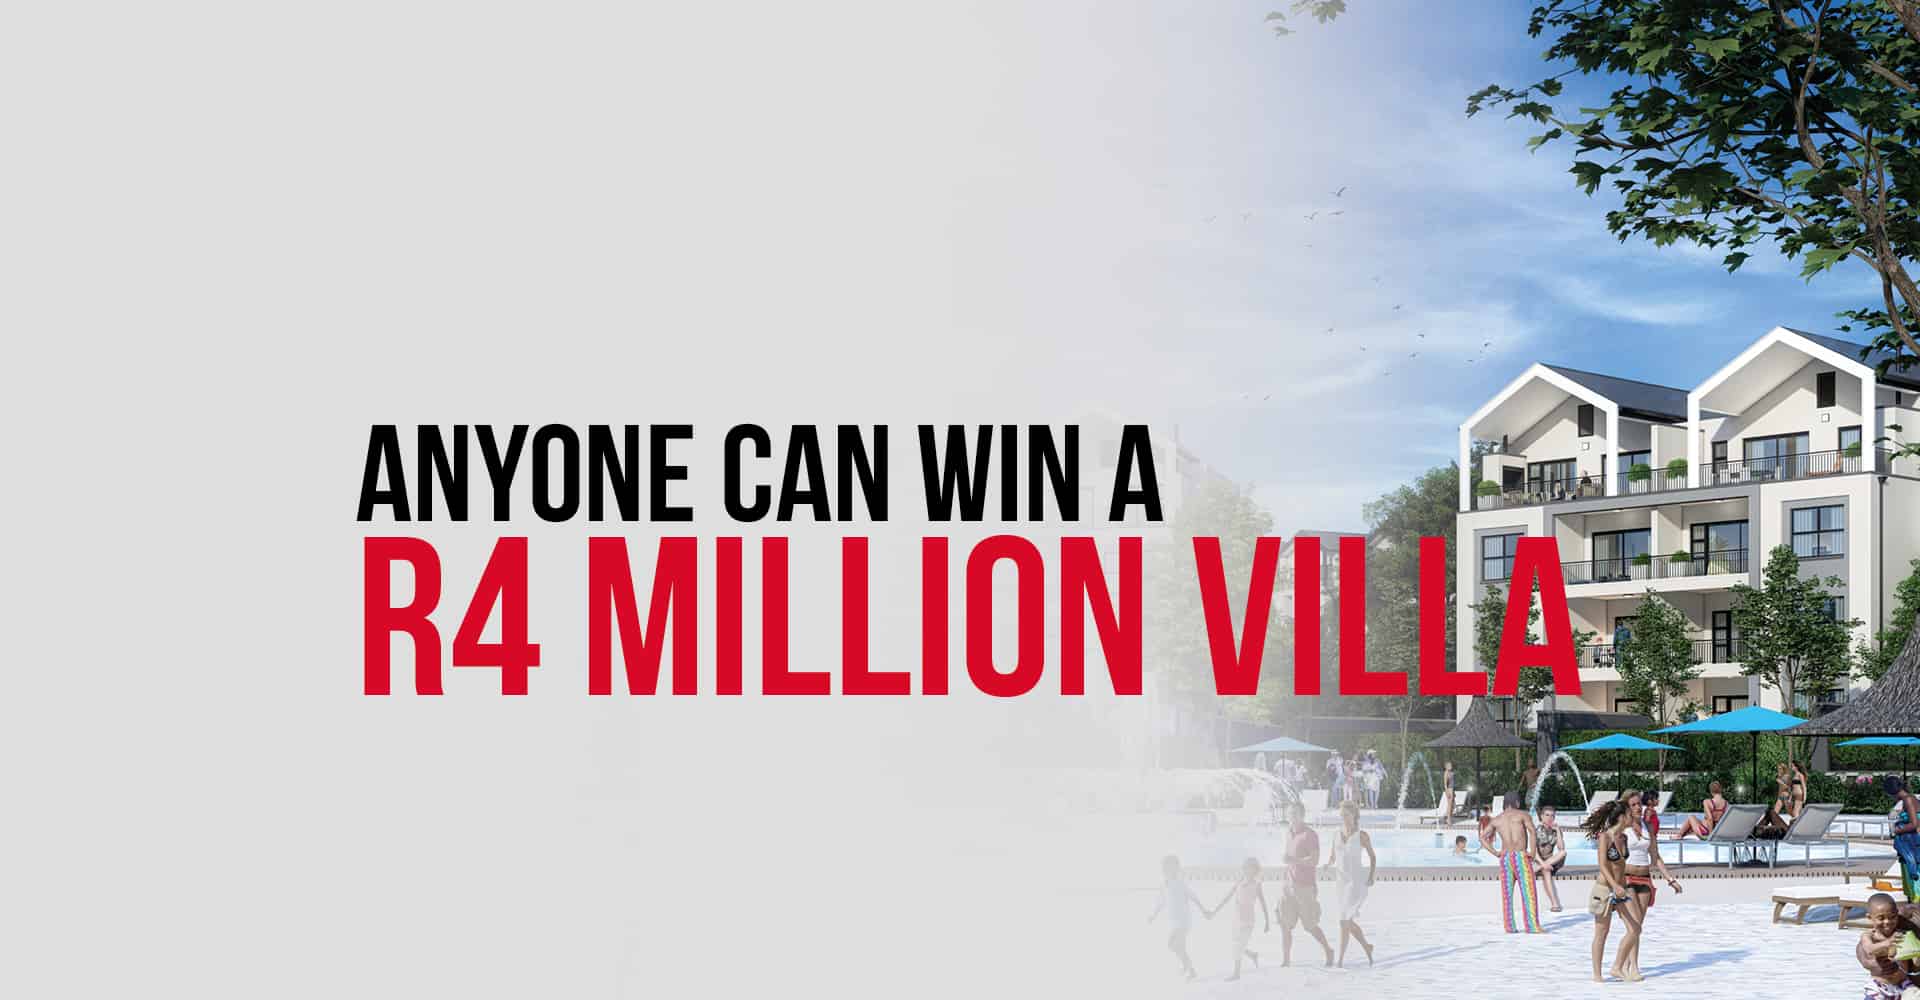 YOUR STAY AT ANY MONTECASINO HOTEL COULD WIN YOU A FULLY FURNISHED APARTMENT AT MUNYAKA PLUS R3 MILLION IN CASH!